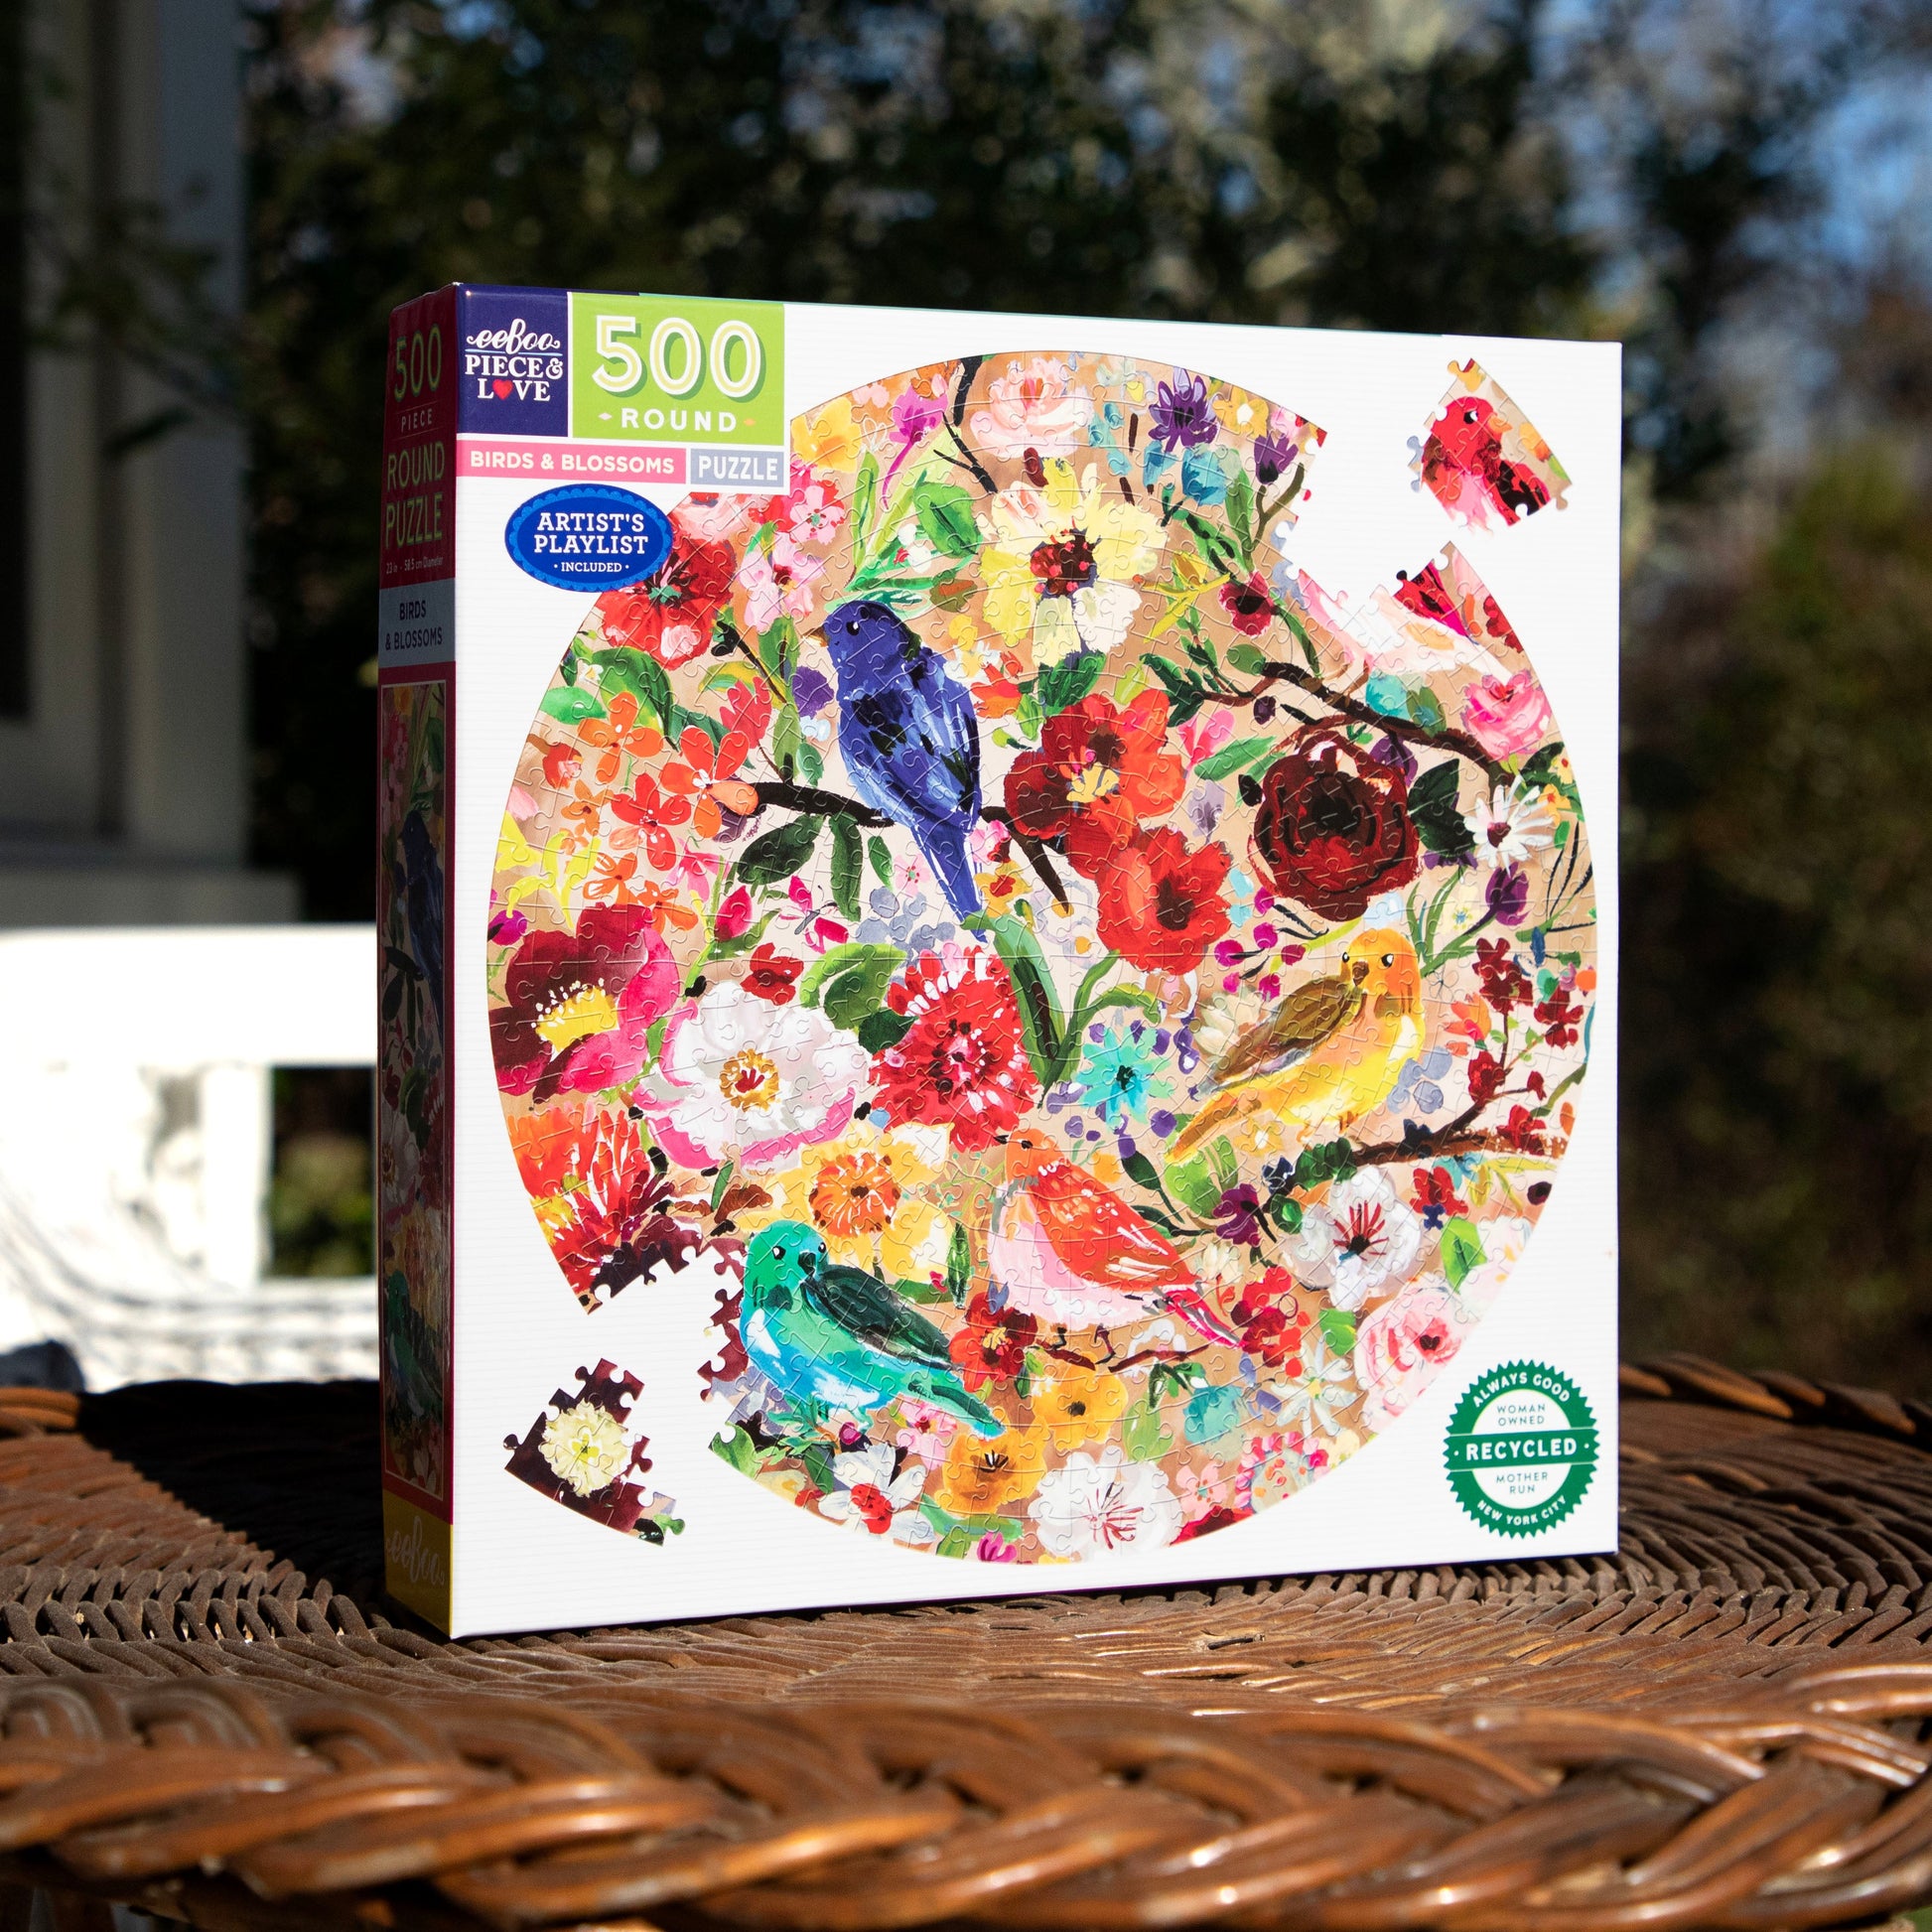 Birds & Blossoms 500 Piece Round Jigsaw Puzzle | Beautiful Unique Gift for Bird & Garden Lovers